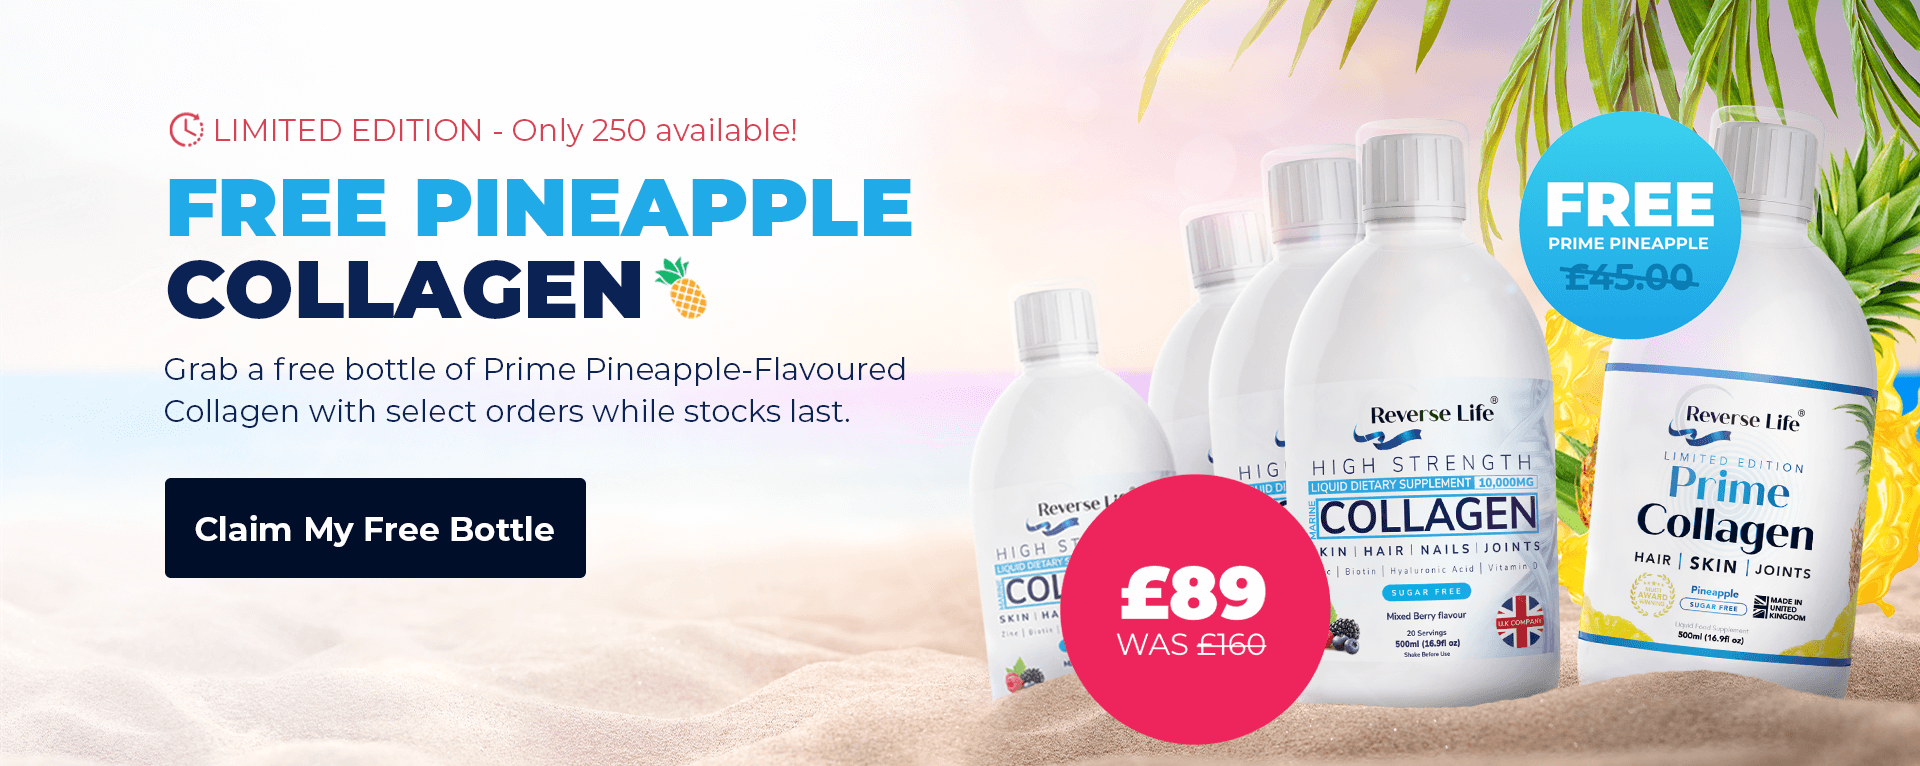 Free pineapple collagen. Grab a free bottle of Prime Pineapple-Flavoured Collagen with select orders while stocks last.